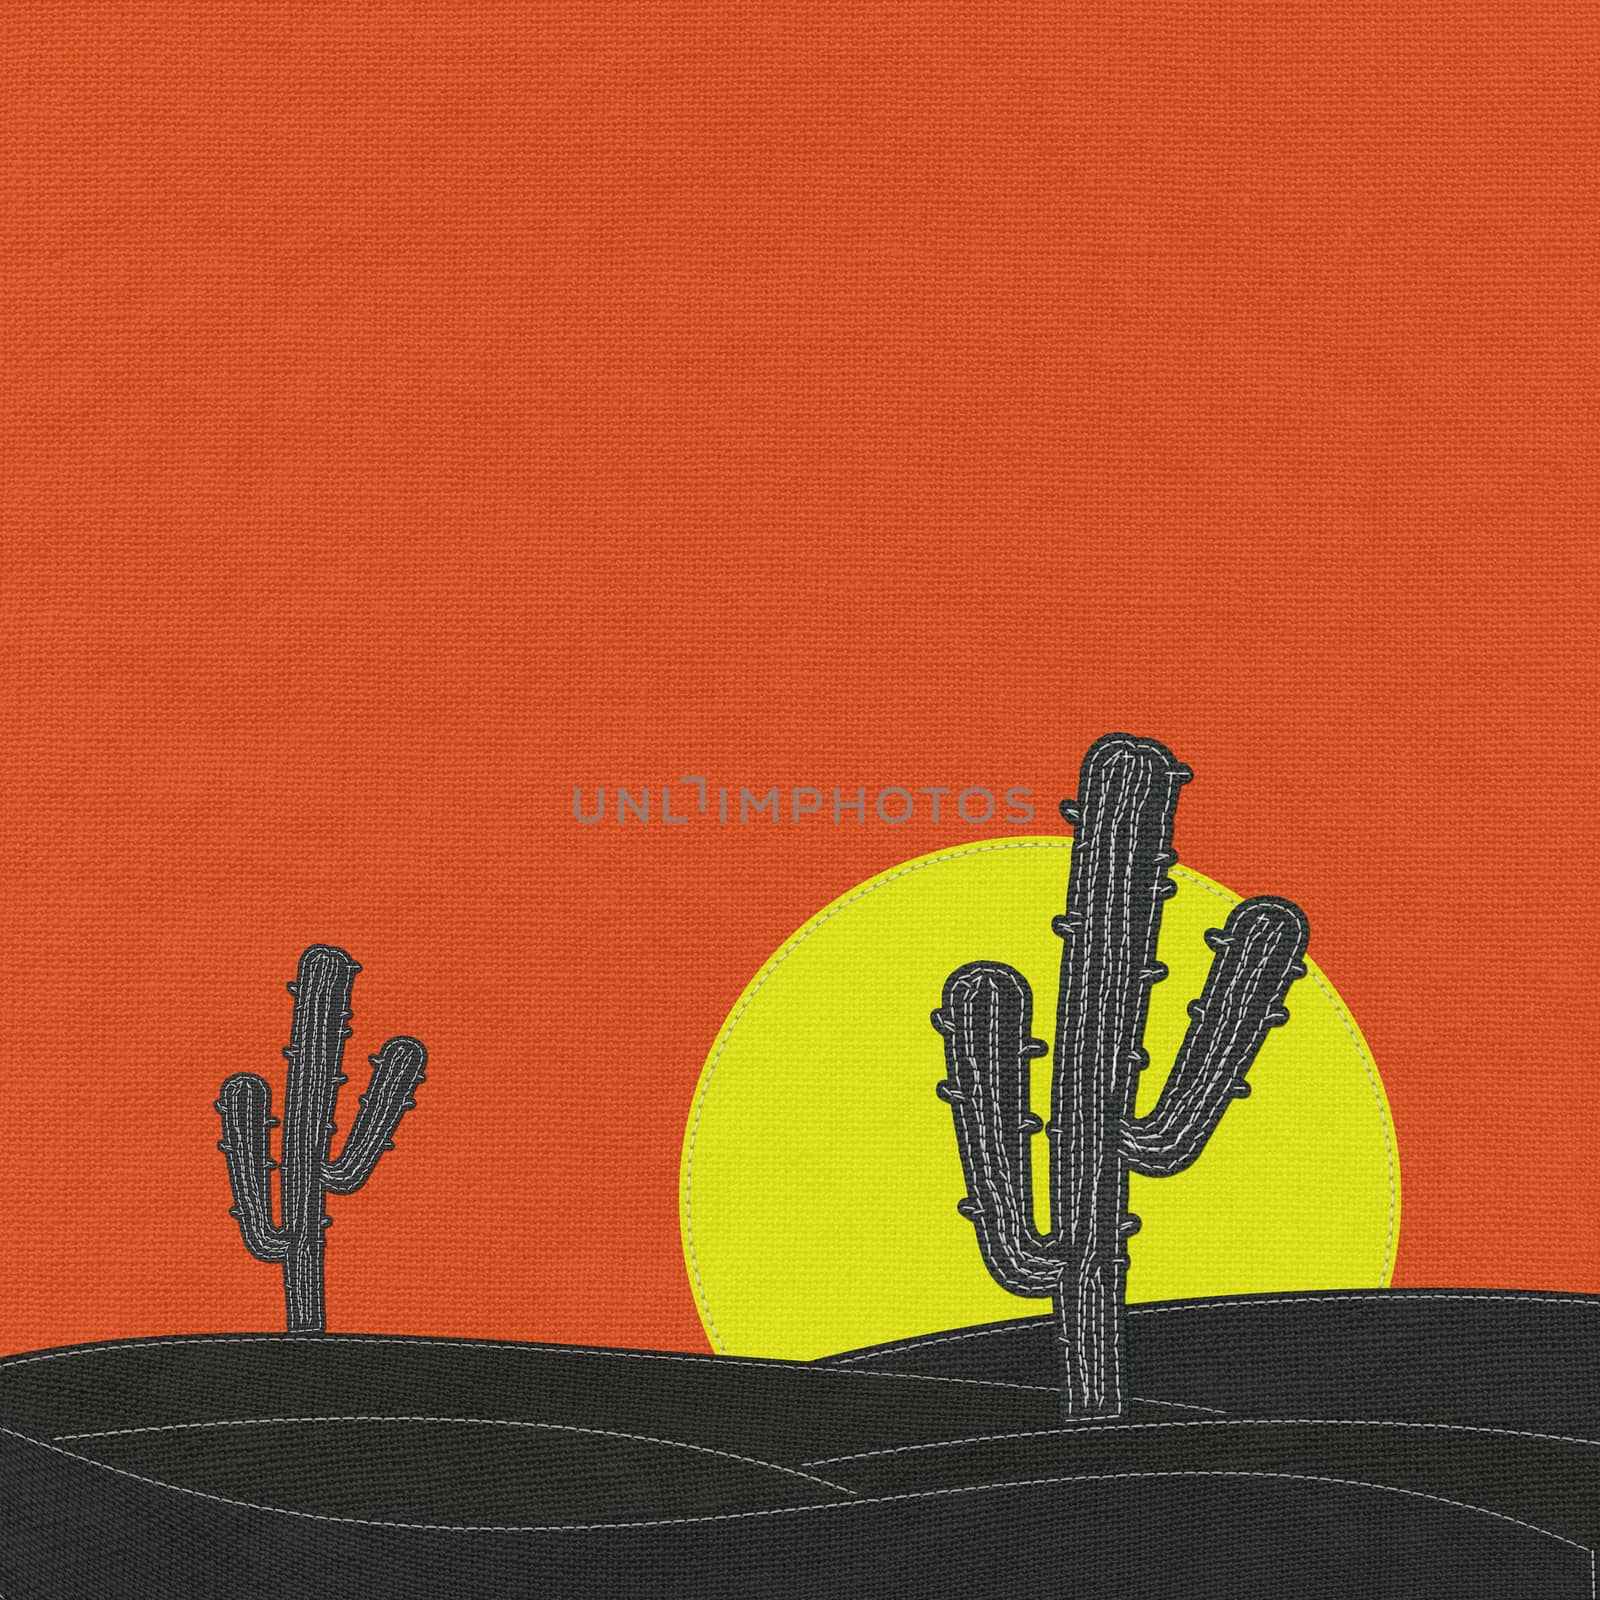 Cactus in the desert with stitch style on fabric background by basketman23